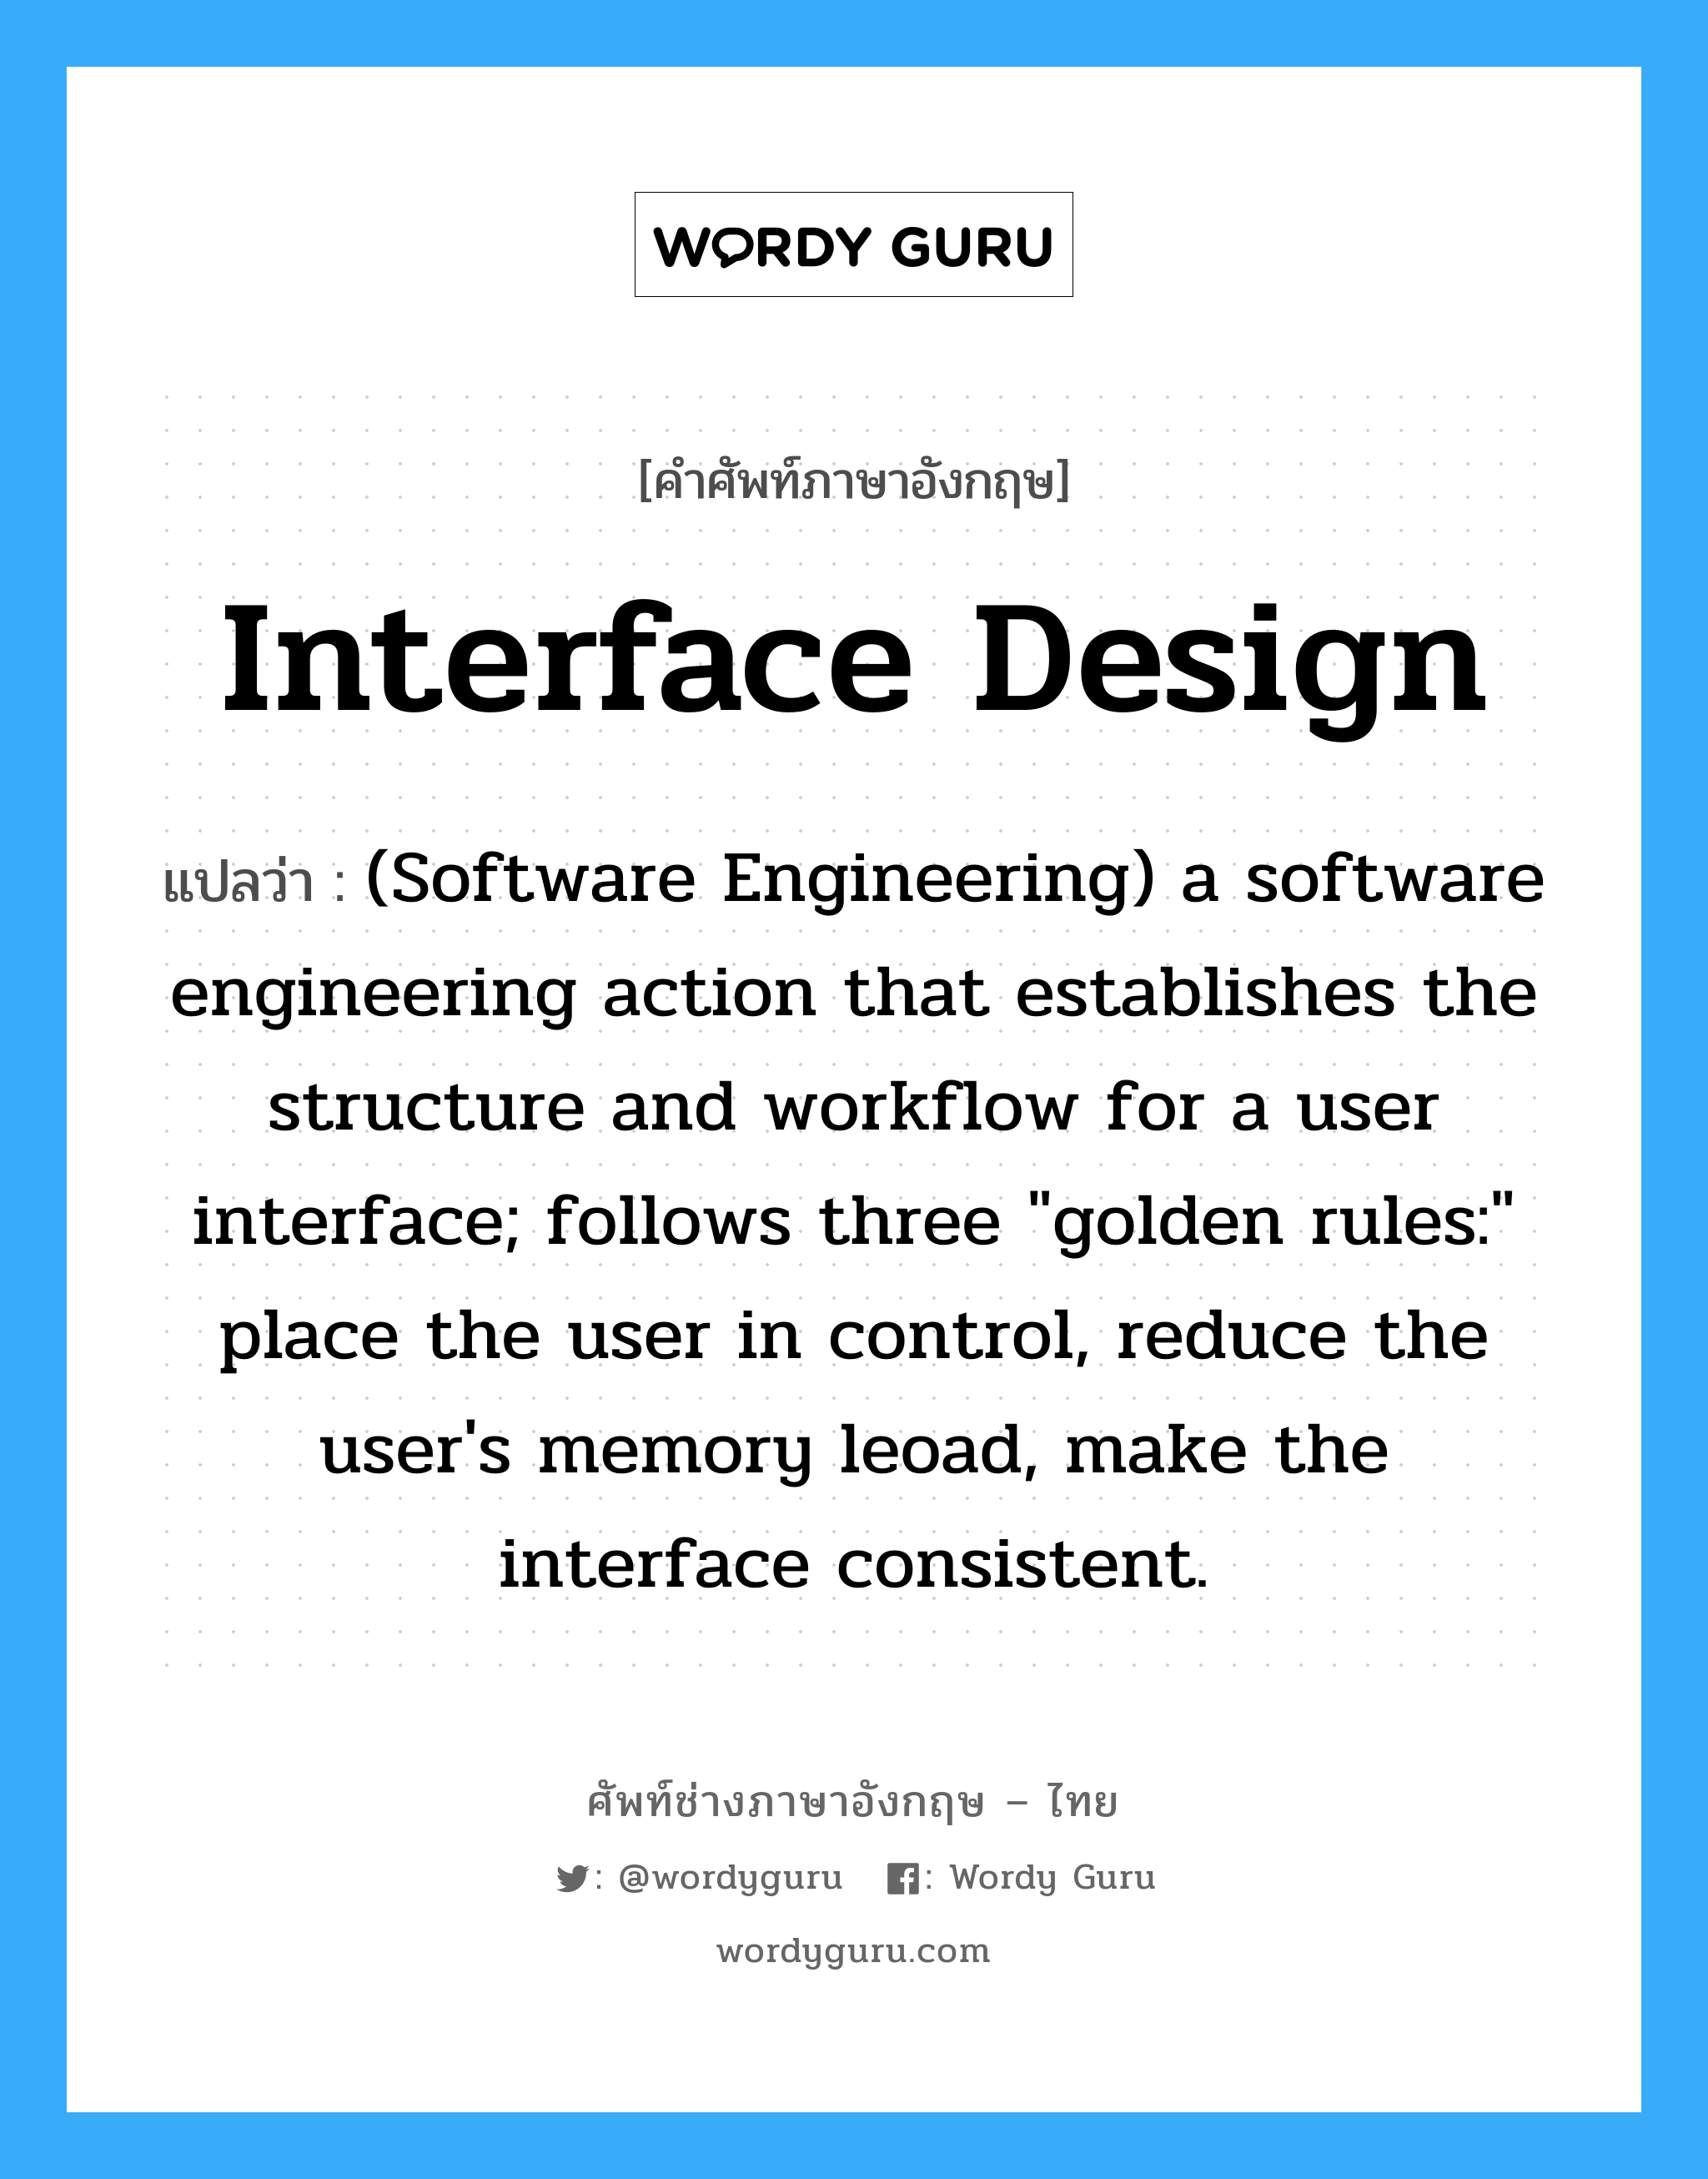 Interface design แปลว่า?, คำศัพท์ช่างภาษาอังกฤษ - ไทย Interface design คำศัพท์ภาษาอังกฤษ Interface design แปลว่า (Software Engineering) a software engineering action that establishes the structure and workflow for a user interface; follows three "golden rules:" place the user in control, reduce the user's memory leoad, make the interface consistent.